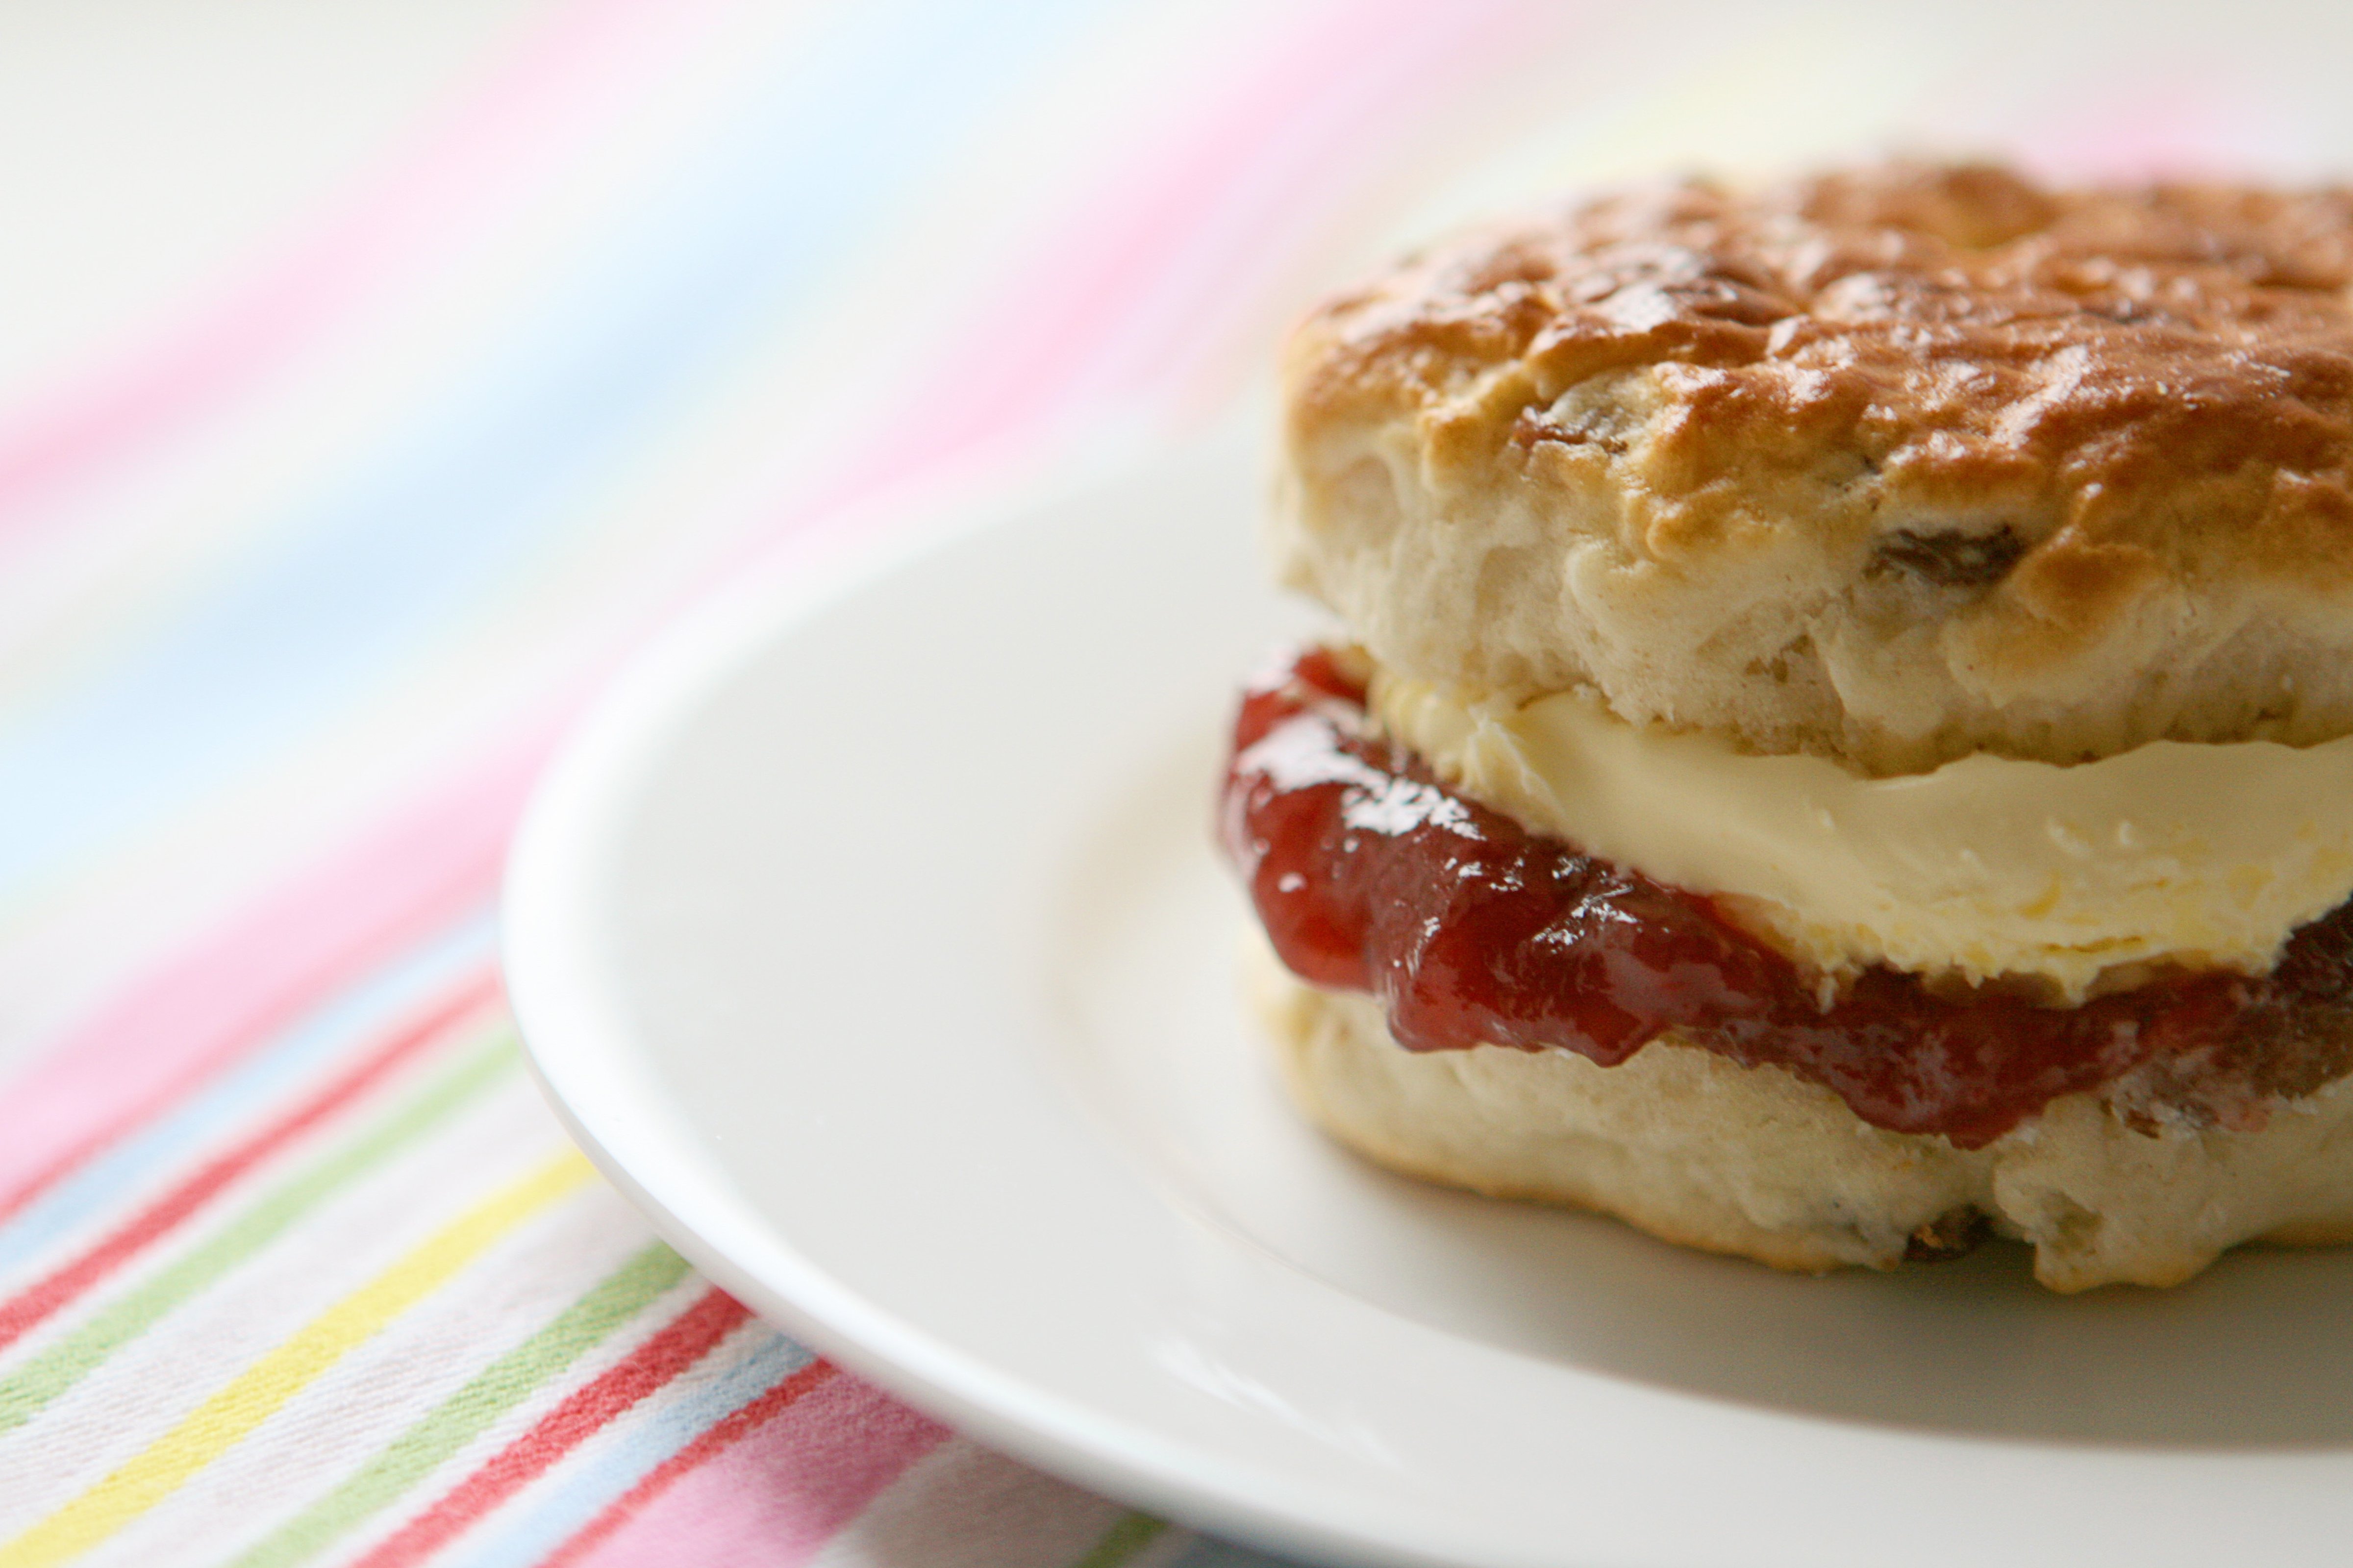 Scone With Jam And Clotted Cream